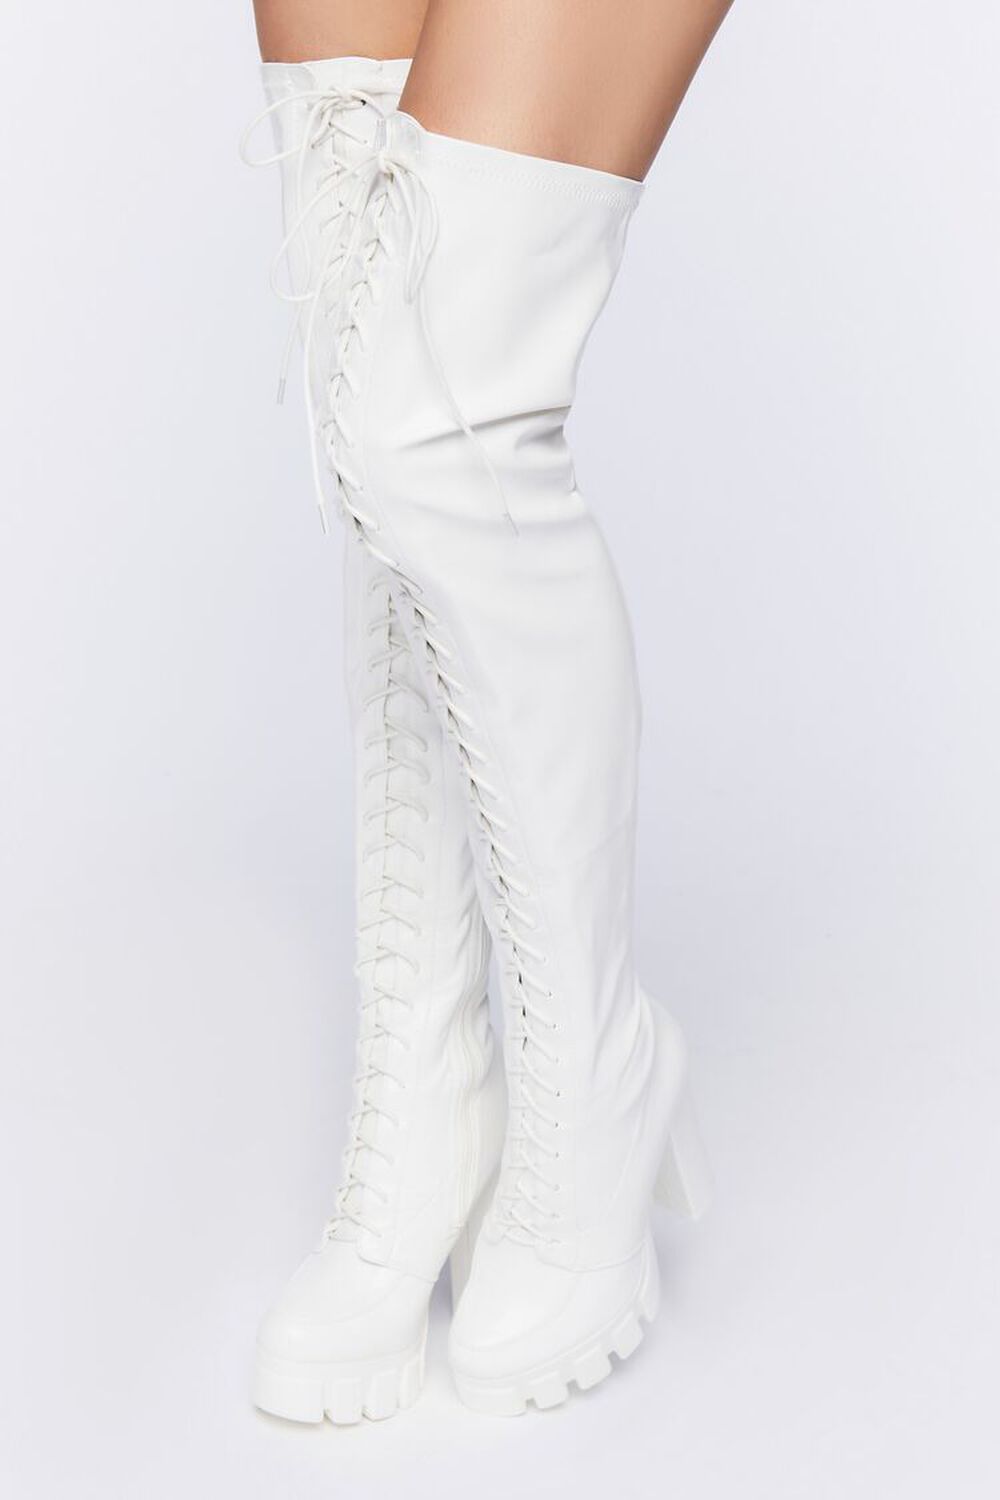 WHITE Lace-Up Thigh-High Boots, image 1